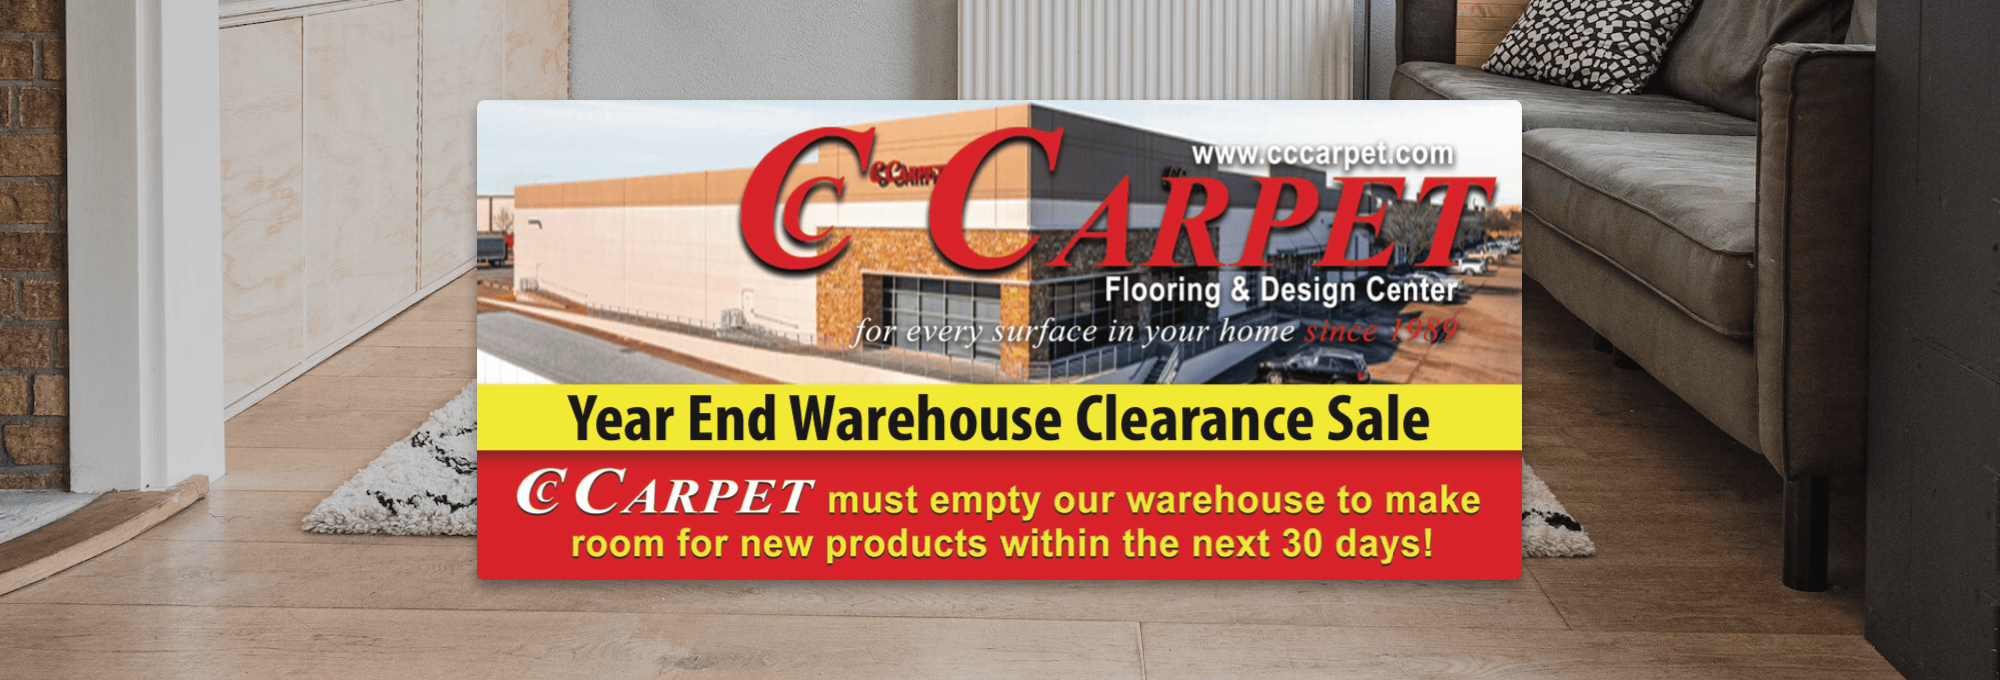 CC Carpet in the Dallas Forth Worth area is having a year end clearance sale that starts on February 1st, 2024